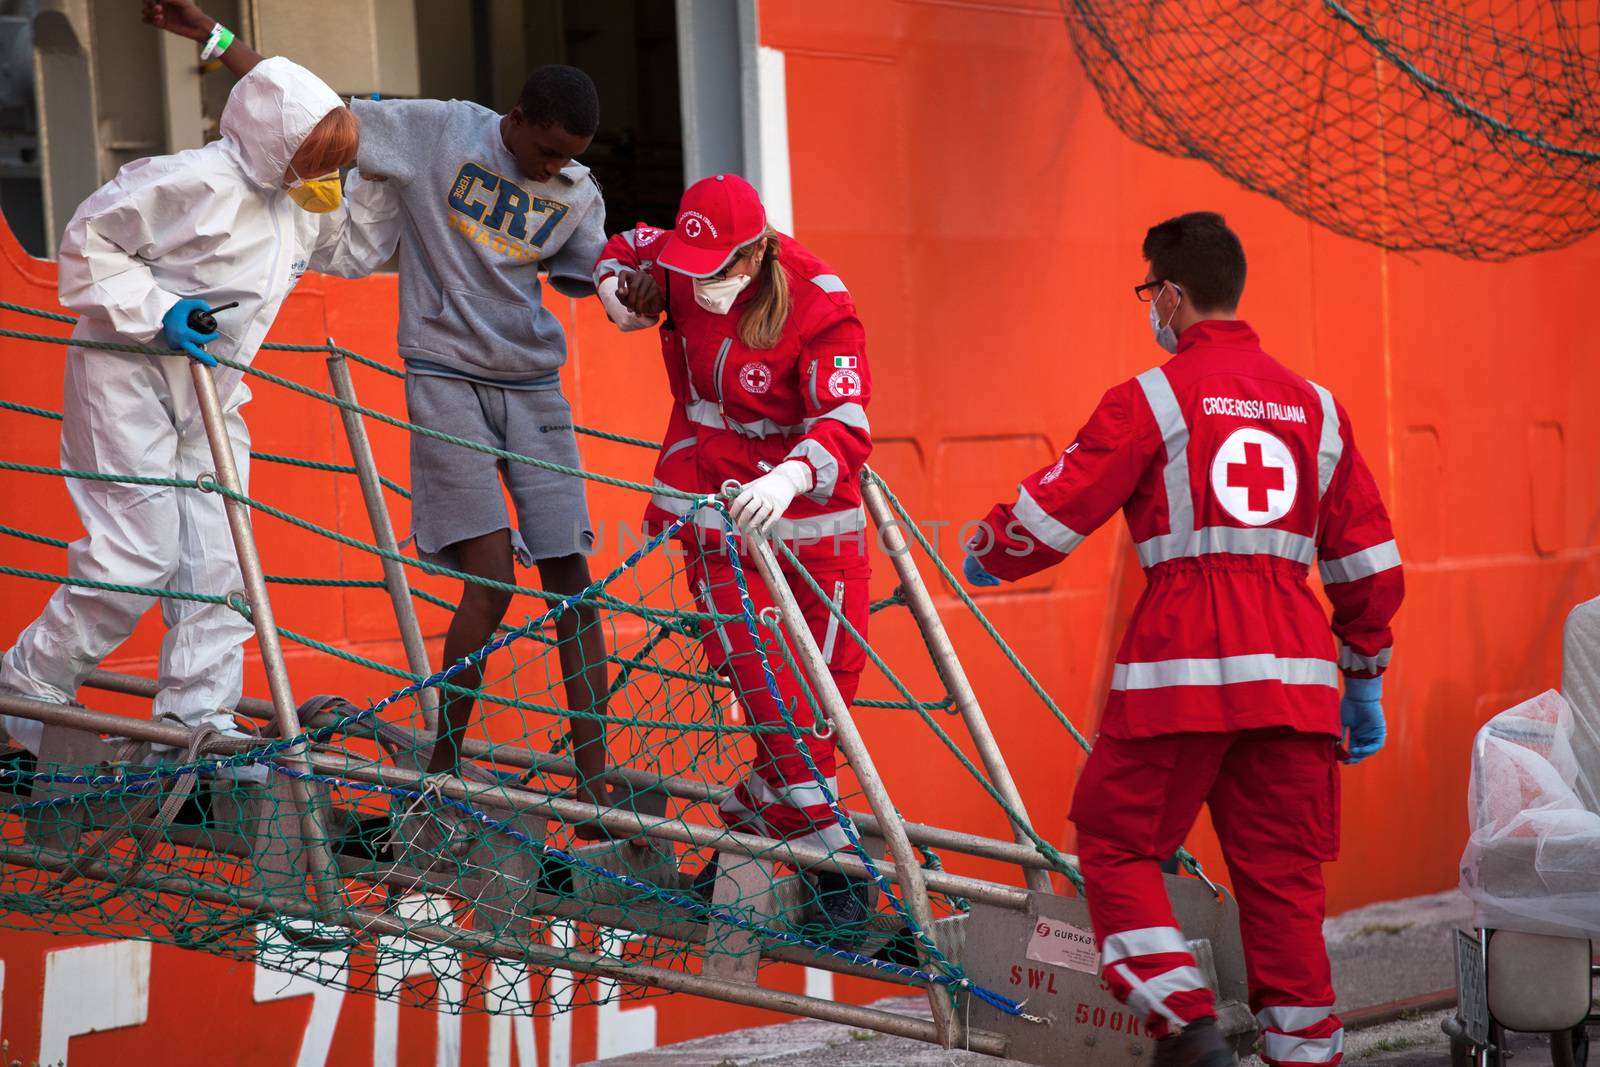 ITALY, Palermo: Medical workers assist a migrant off the Siem Pilot on April 13, 2016 in Palermo, Italy.The vessel has been a major transporter of migrants fleeing the Middle East and Africa to Europe. 